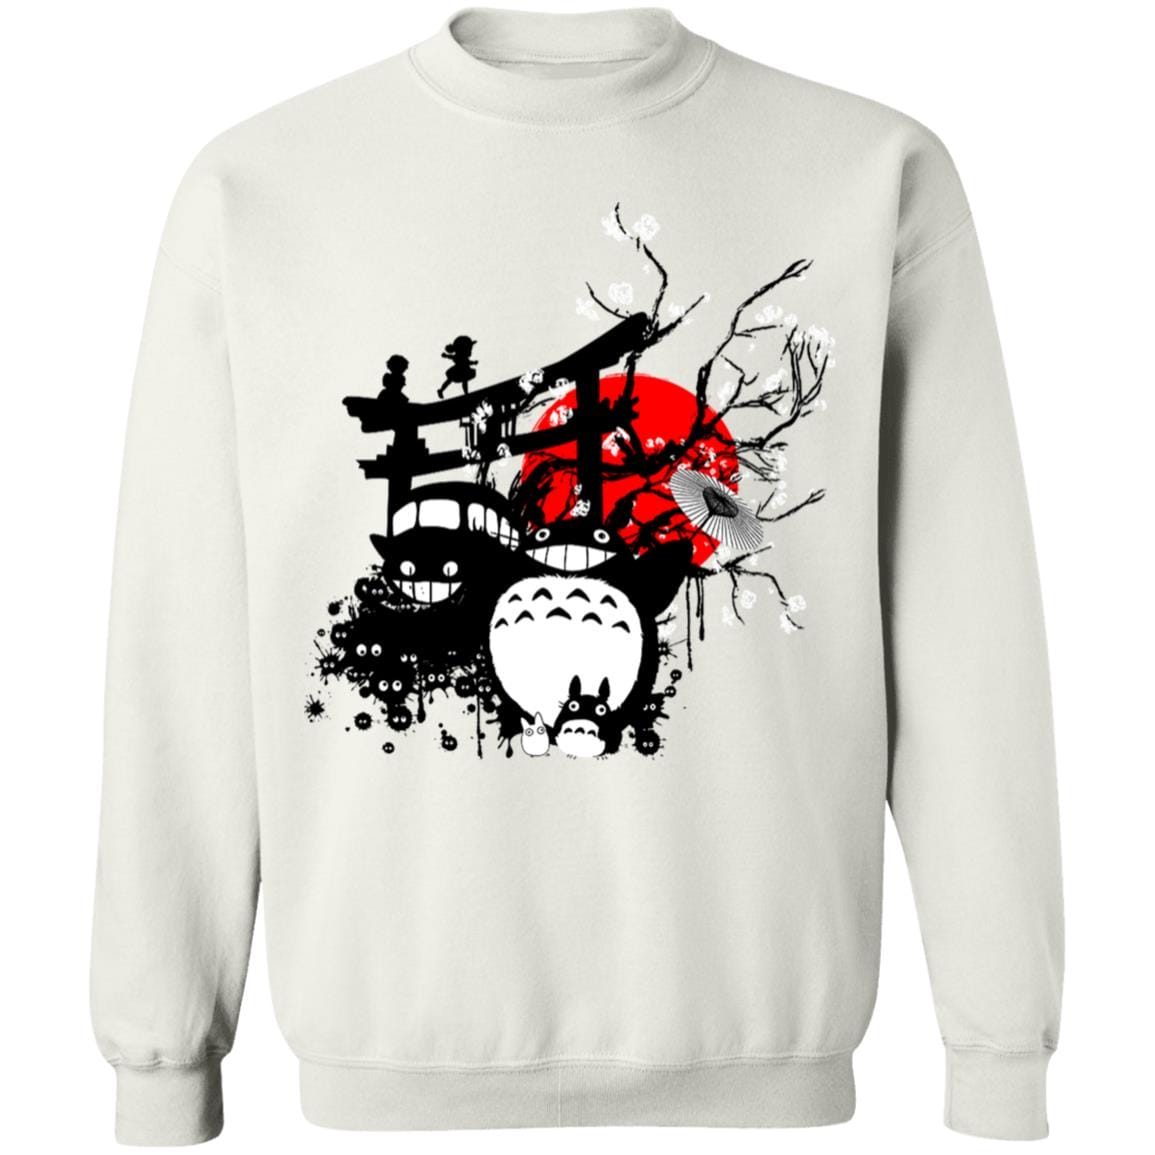 Totoro and Friends by the Red Moon Sweatshirt